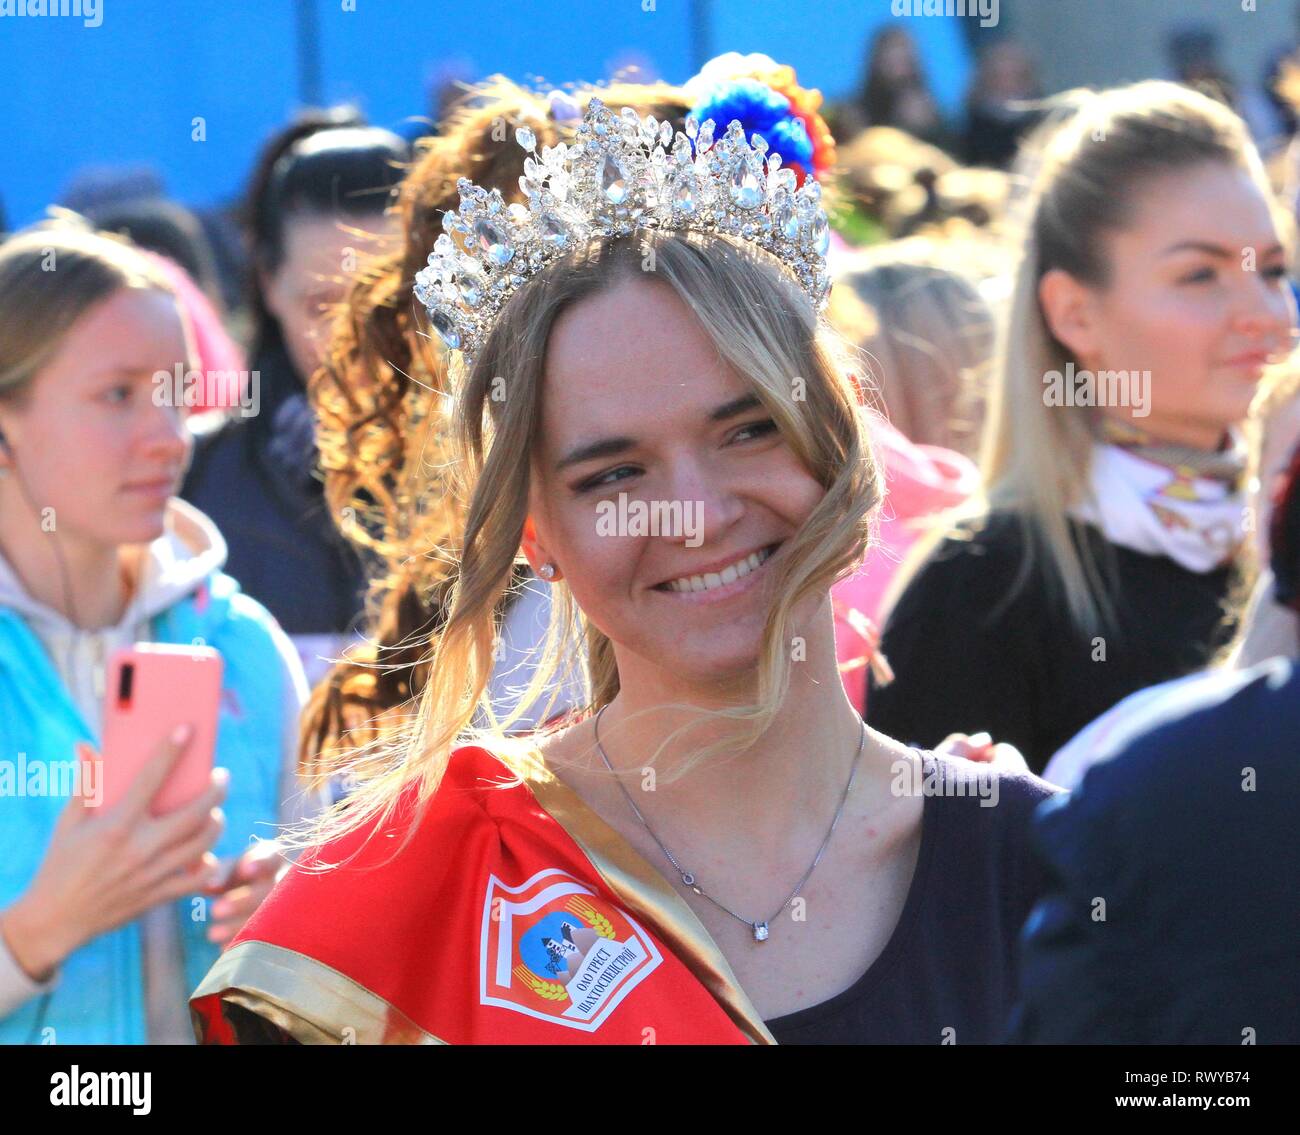 Minsk, Belarus. 8th Mar, 2019. A contestant participates in a beauty run marking the Internationa Women's Day in Minsk, Belarus, March 8, 2019. More than 5,000 female contestants took part in the event held here on Friday. Credit: Efim Mazurevich/Xinhua/Alamy Live News Stock Photo